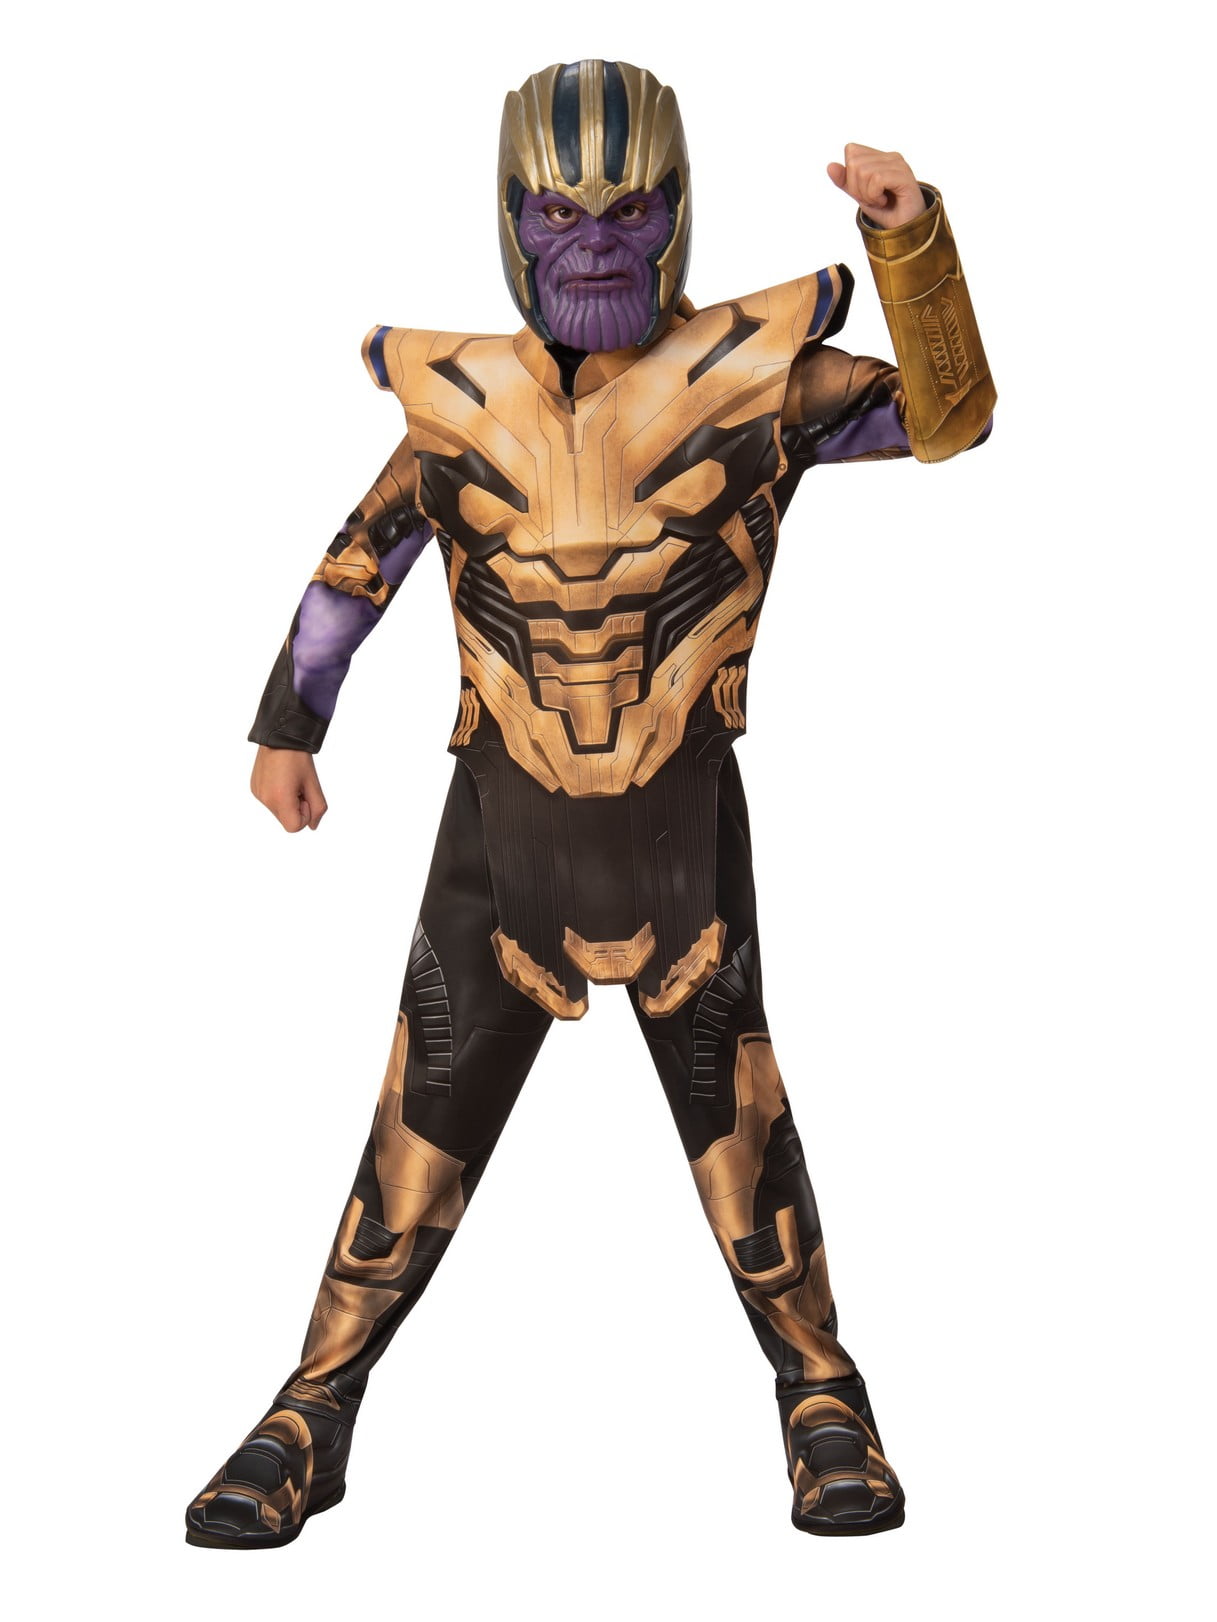 Marvel New Movie Avengers Endgame Thanos High quality Mask Cosplay Costume Prop 